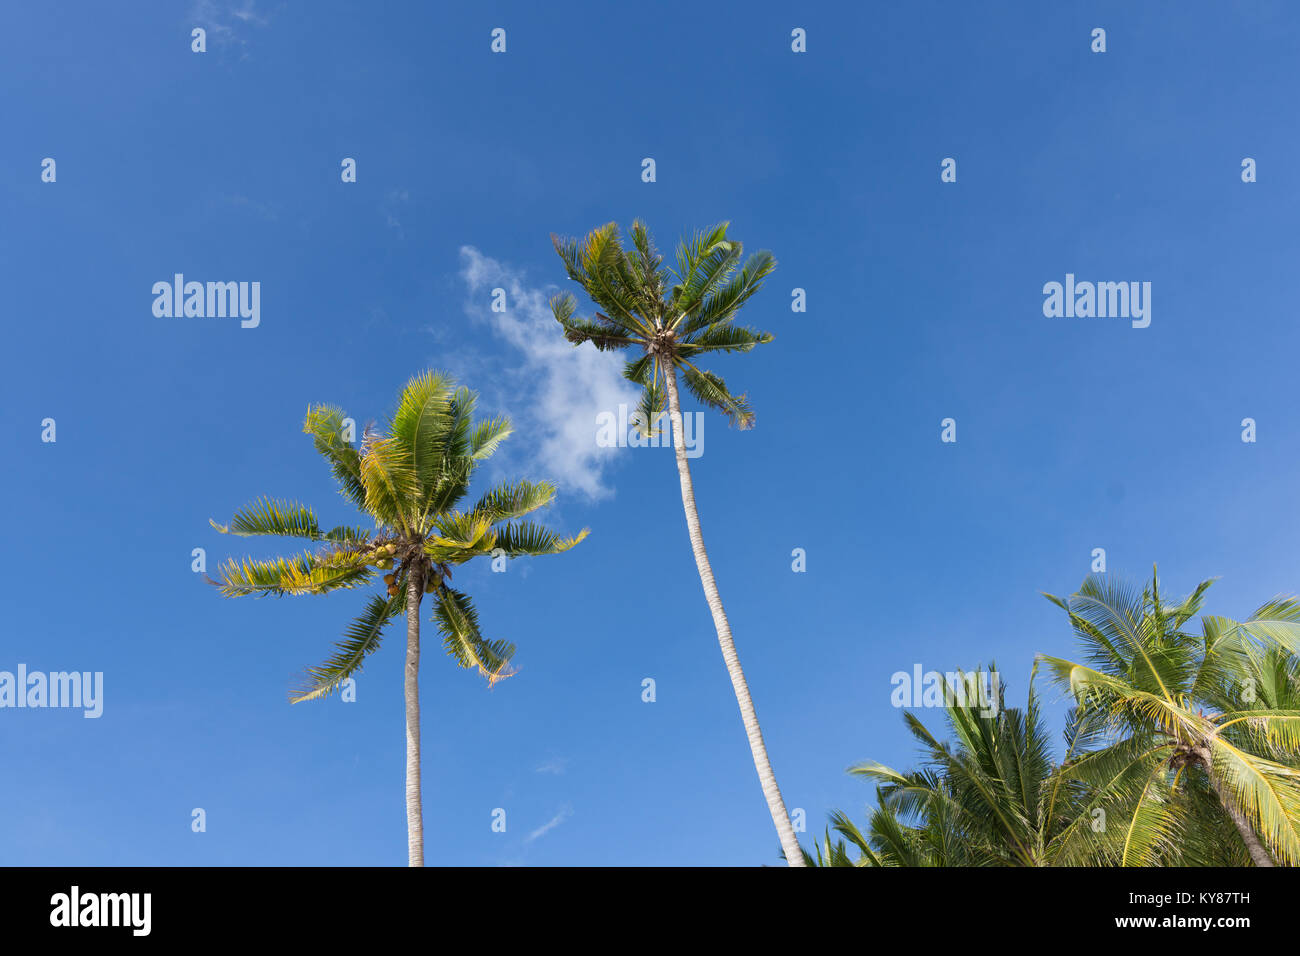 Upwards view of the tops of tall palm trees against a clear blue sky. Stock Photo